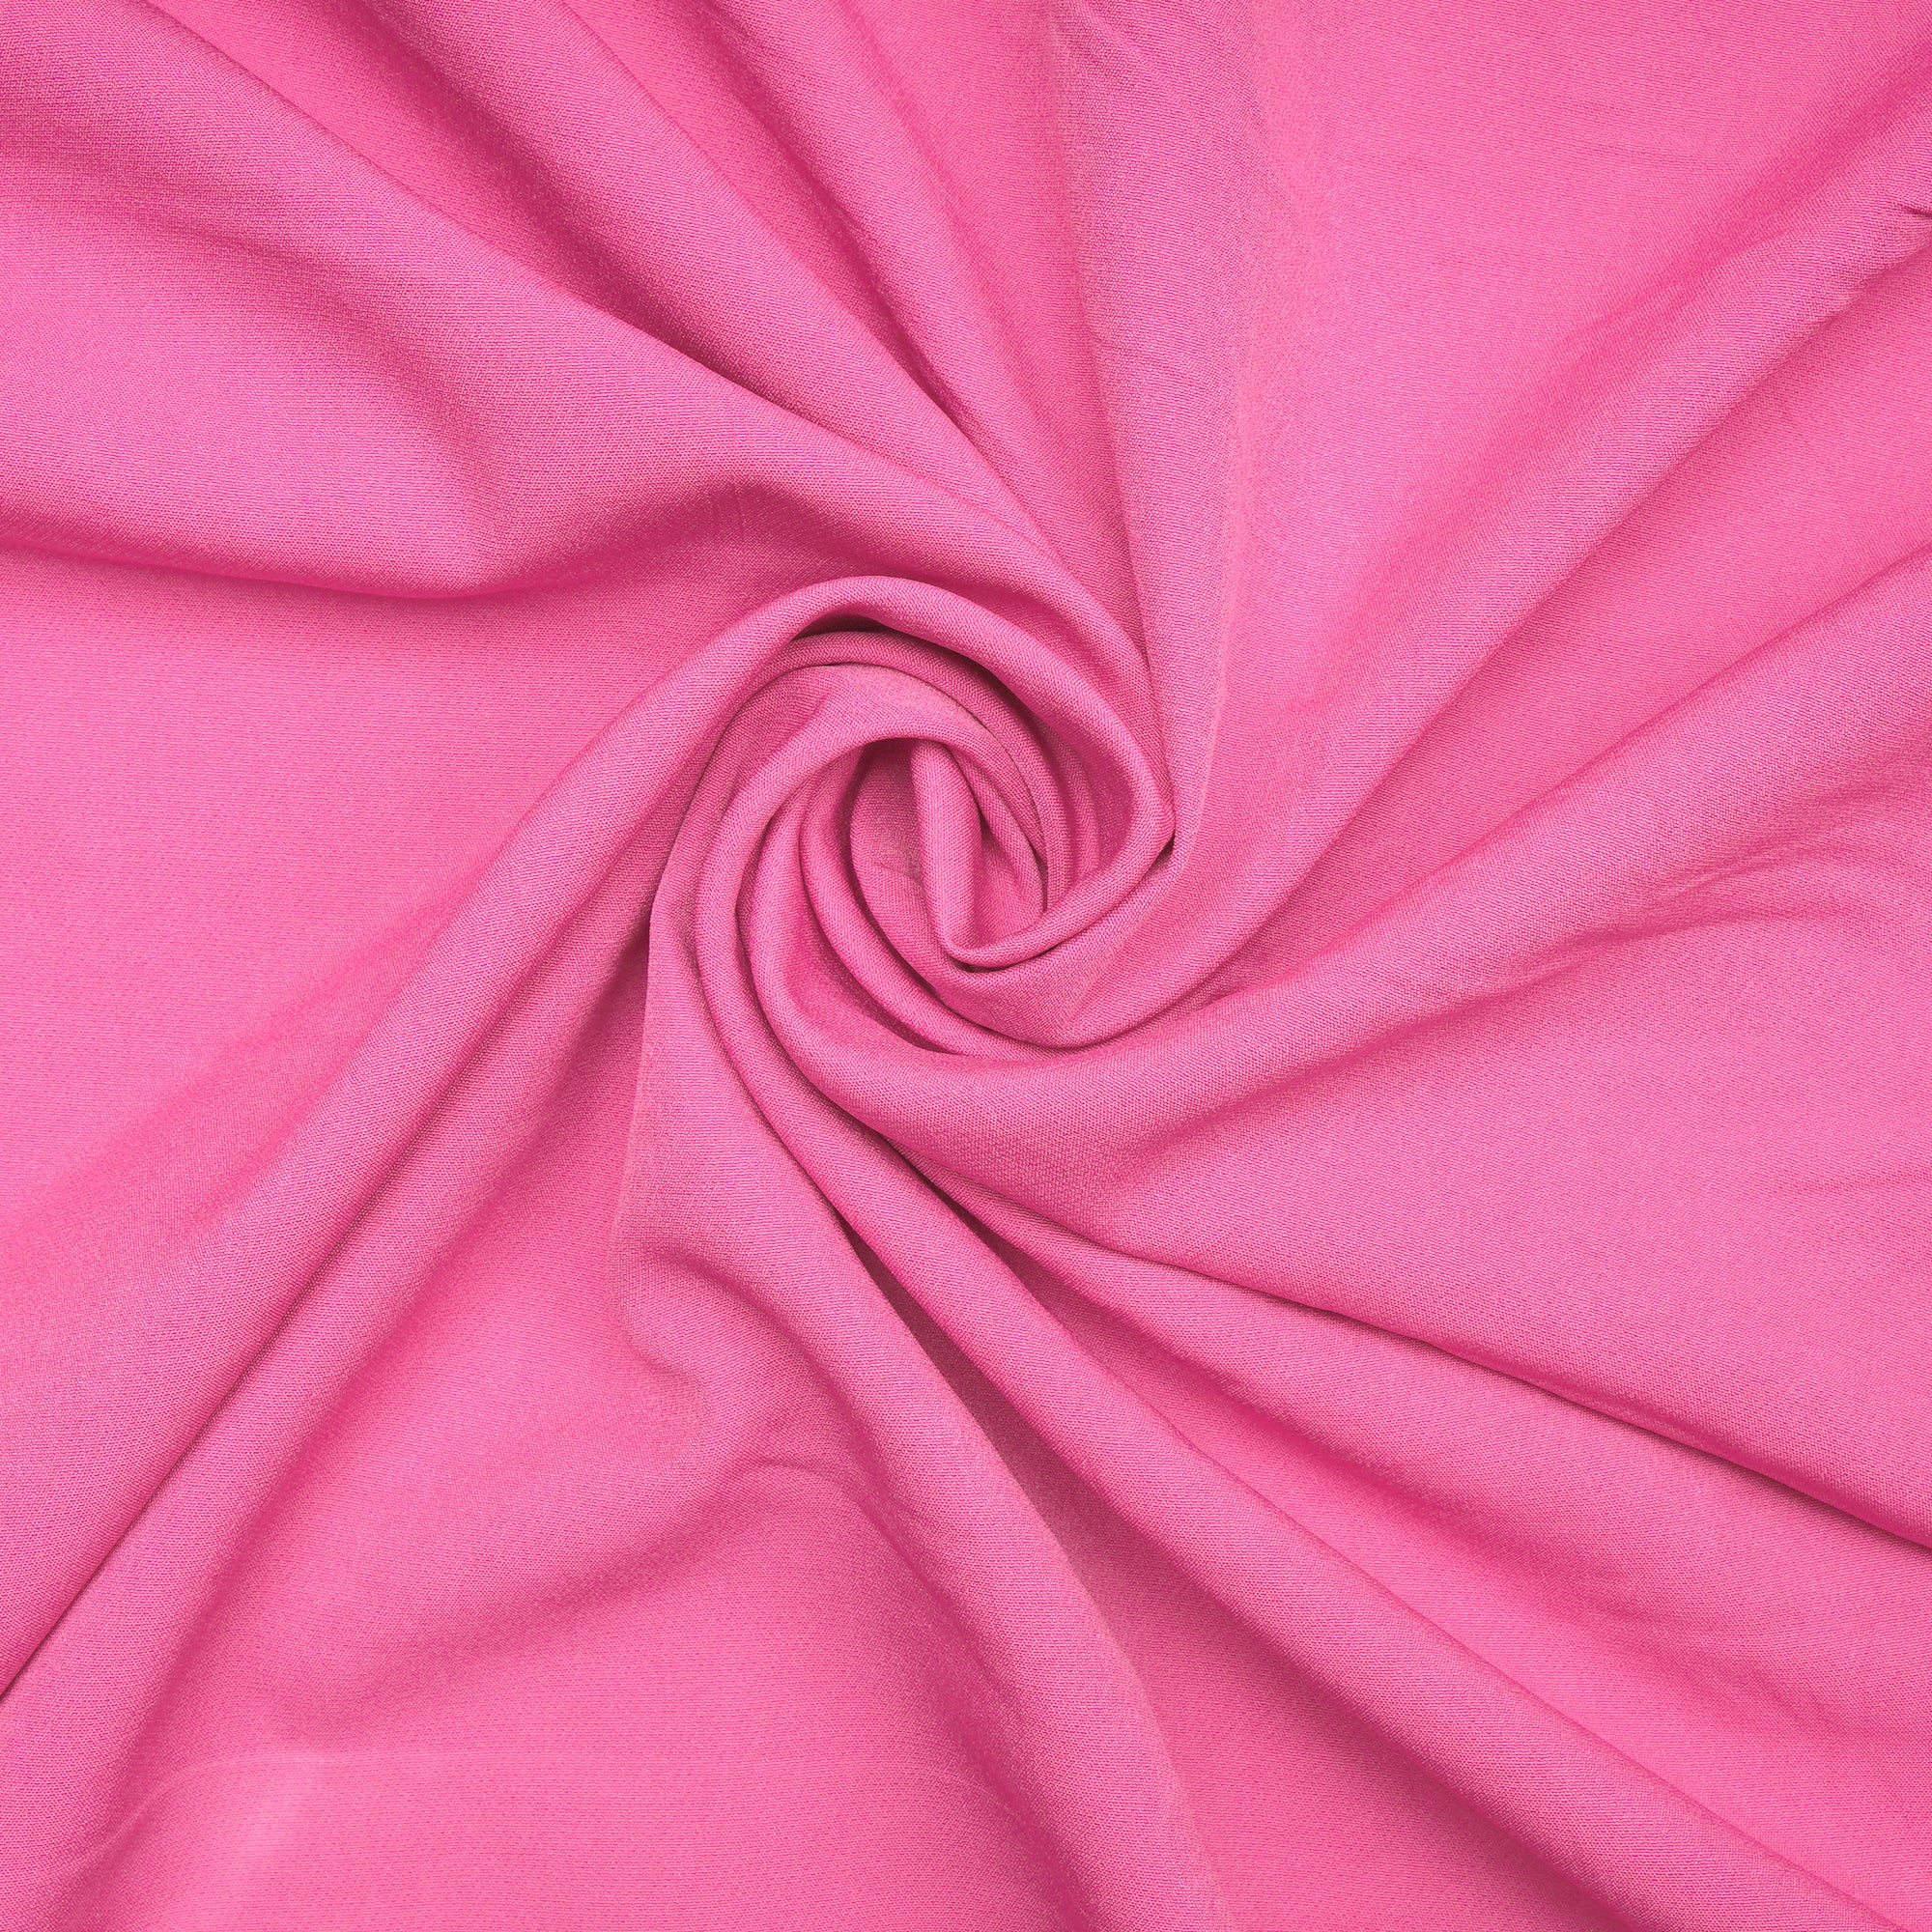 Neon Pink Solid Dyed Imported Banana Crepe Fabric (60" Width)